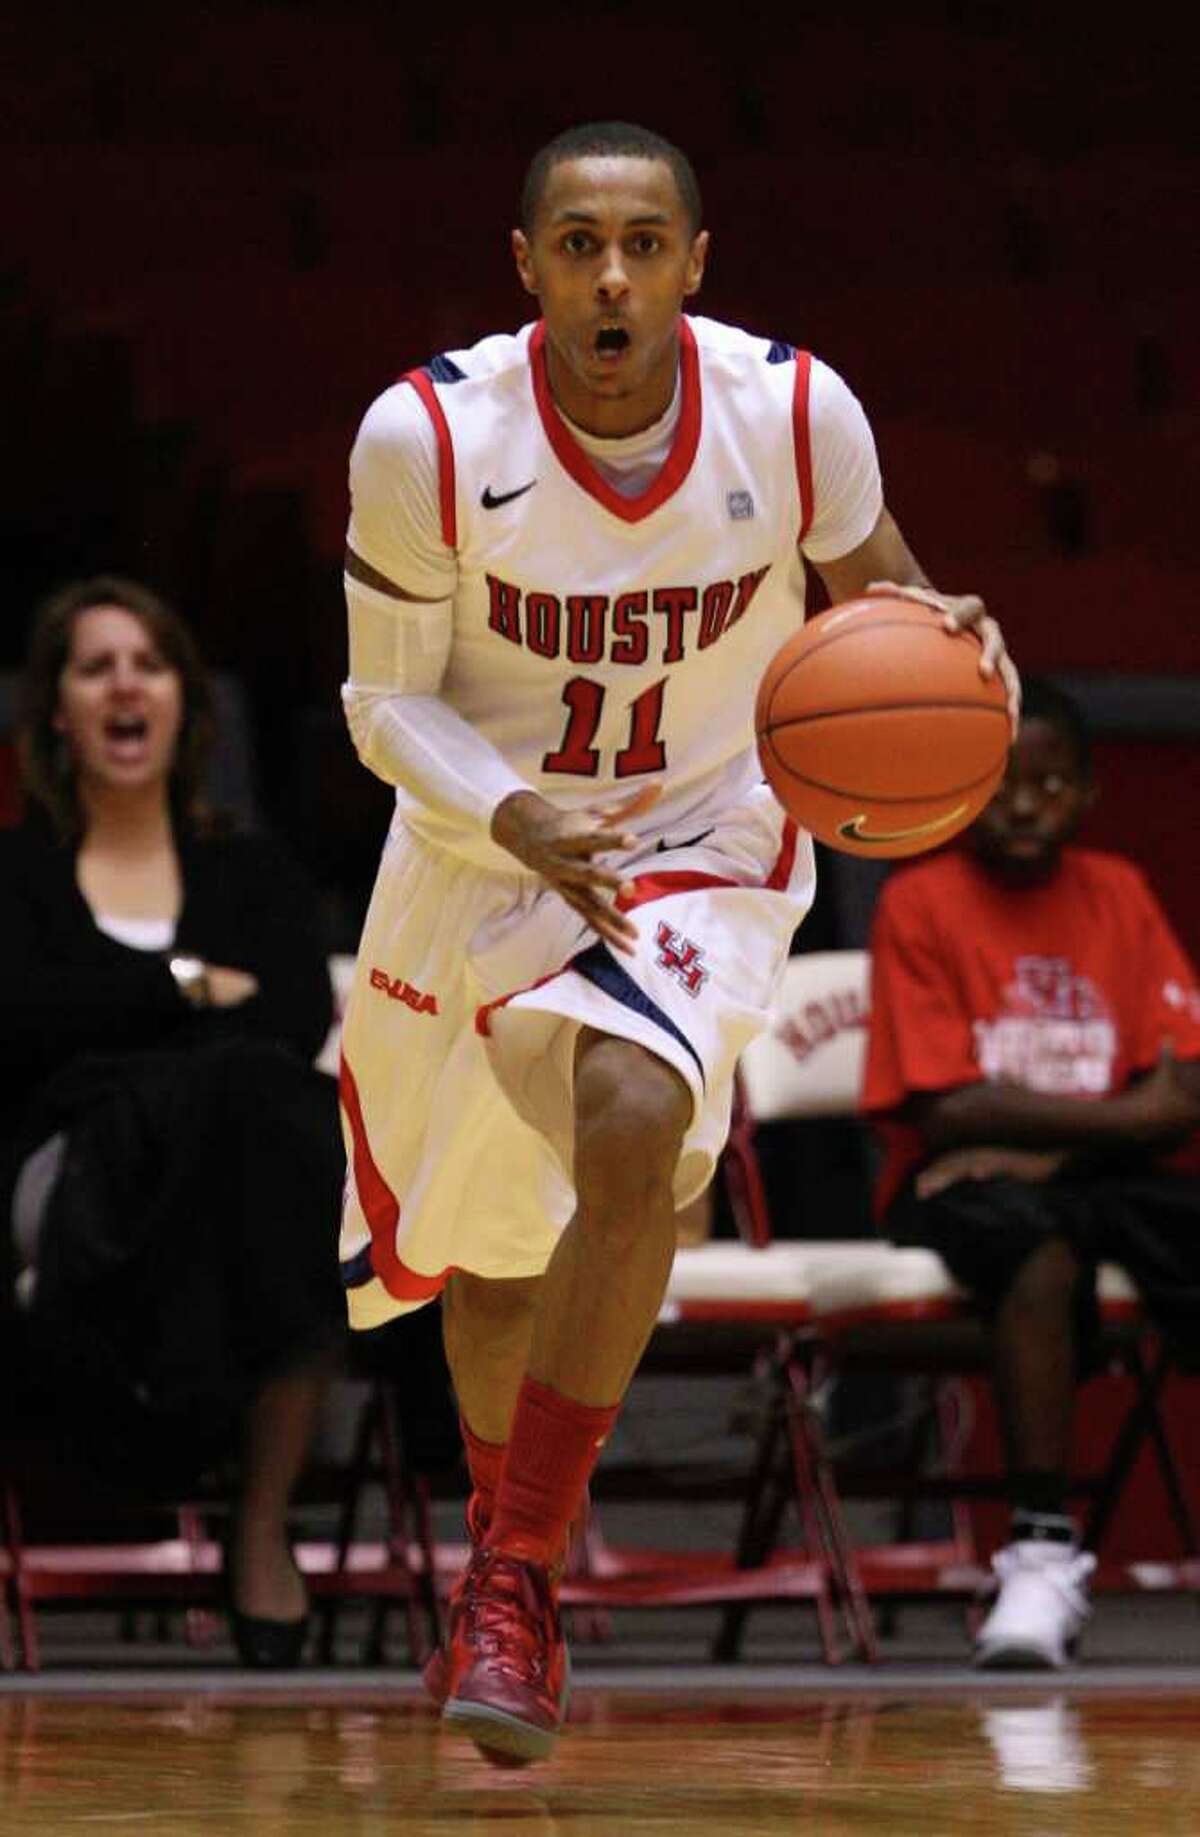 The University of Houston's Darian Thibodeaux drives the ball against North Carolina A&T during second half of men's college basketball game action at the University of Houston's Hofheinz Pavilion Wednesday, Dec. 28, 2011, in Houston.